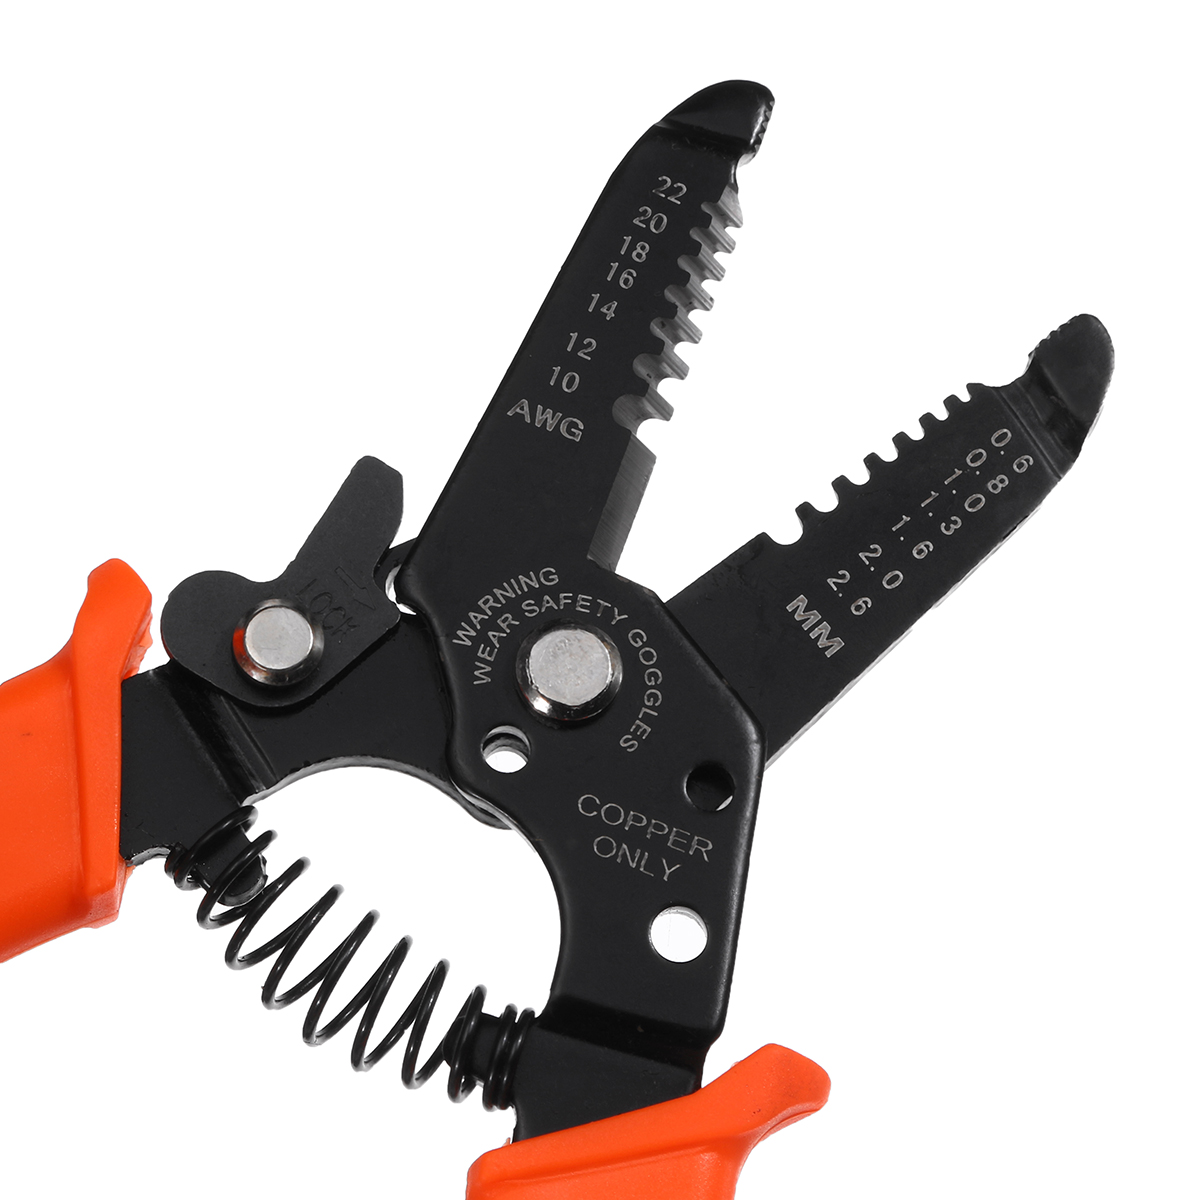 Cable-Wire-Stripper-Cutter-Crimper-Auto-Multi-Functional-Pliers-Tool-1638332-7